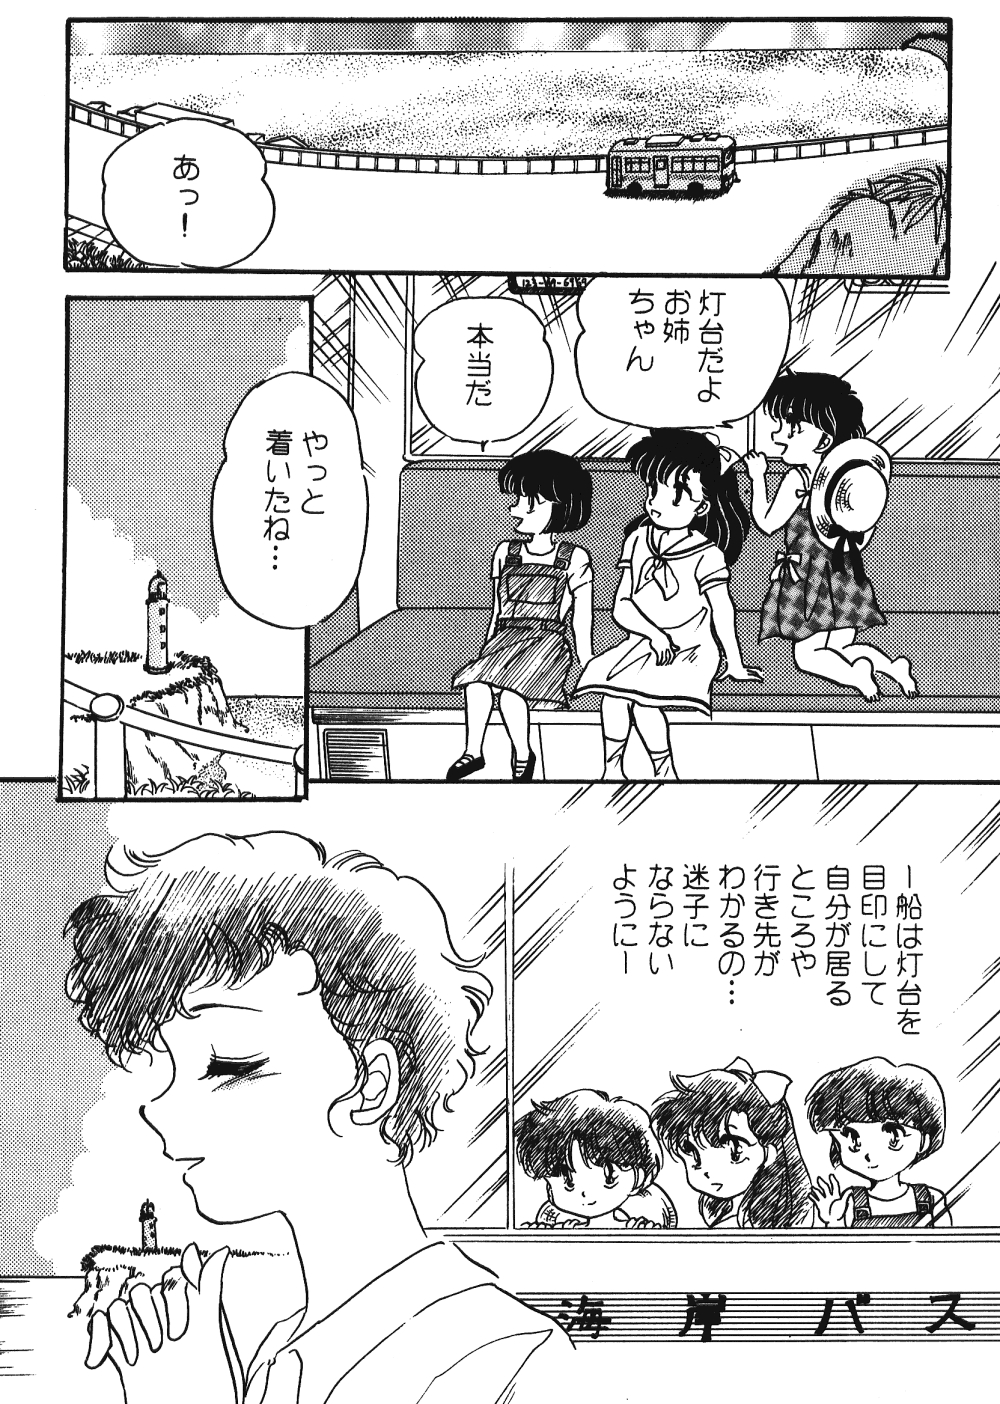 Never Forget Summer (Ranma 1/2) 11